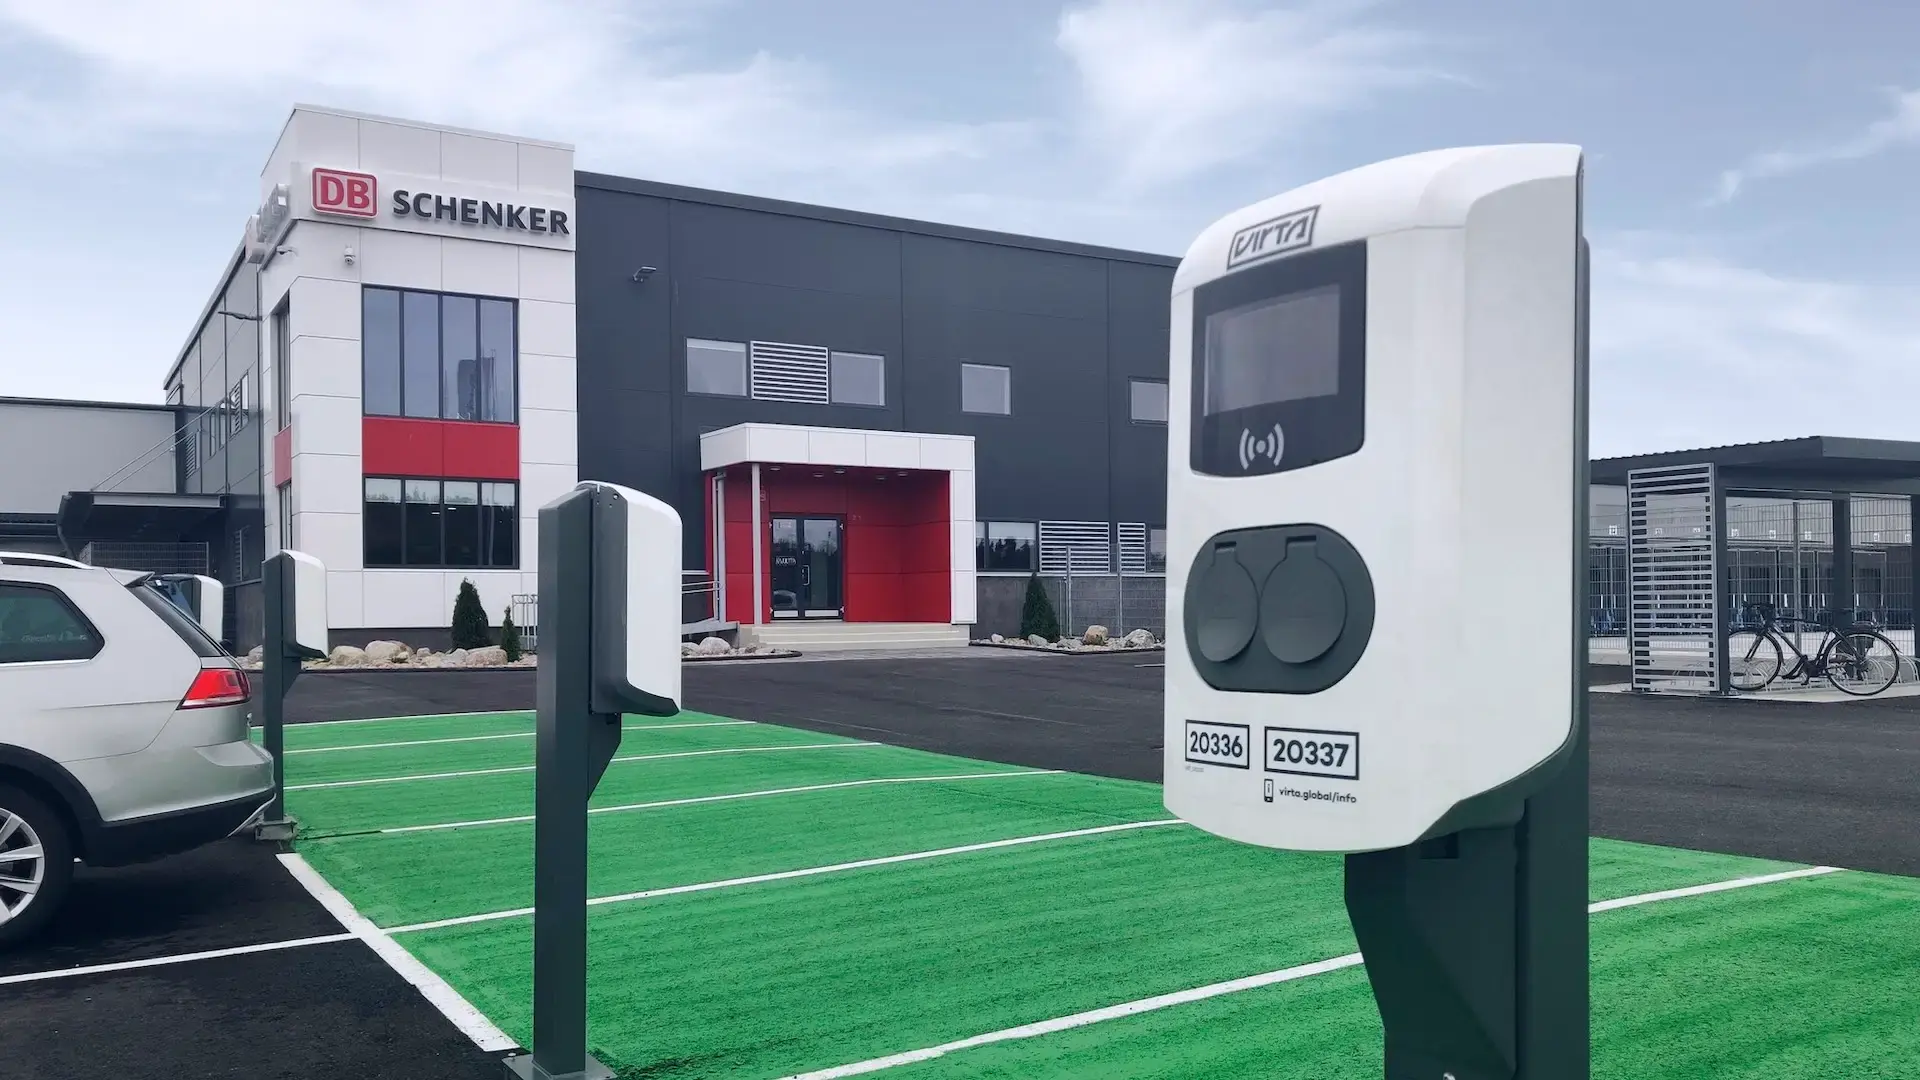 DB Schenker Finland logisitc center parking lot equipped with ac charging stations on poles